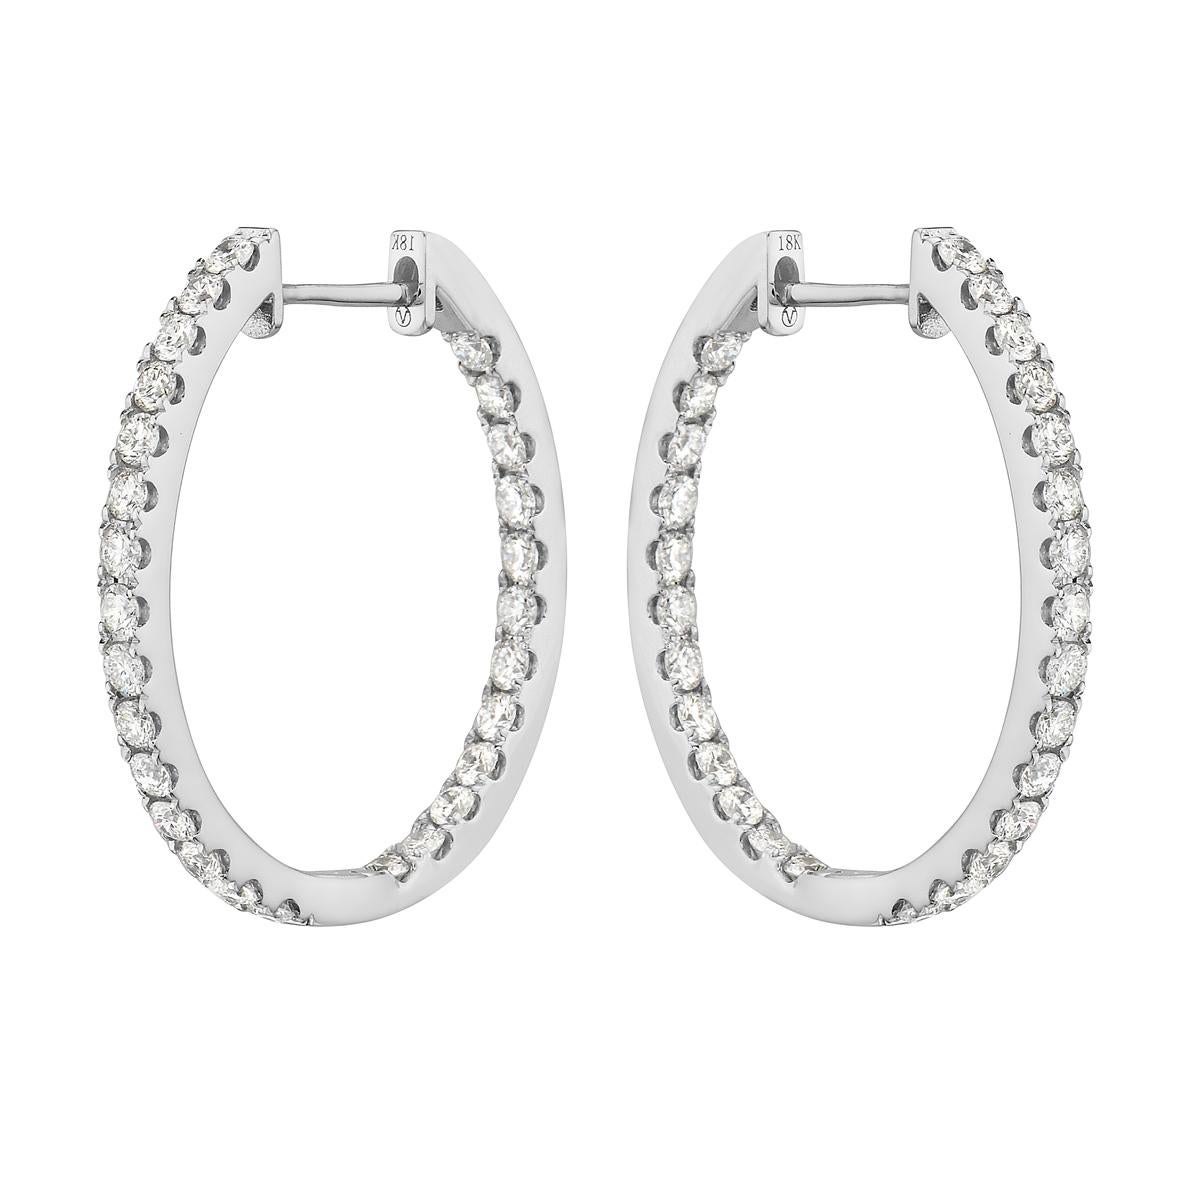 With these exquisite white gold inside and out hoop earrings, style and glamour are in the spotlight. These 18-carat earrings are made from 5.4 grams of gold. These earrings are adorned with VS2, G color diamonds, made out of 54 diamonds totaling